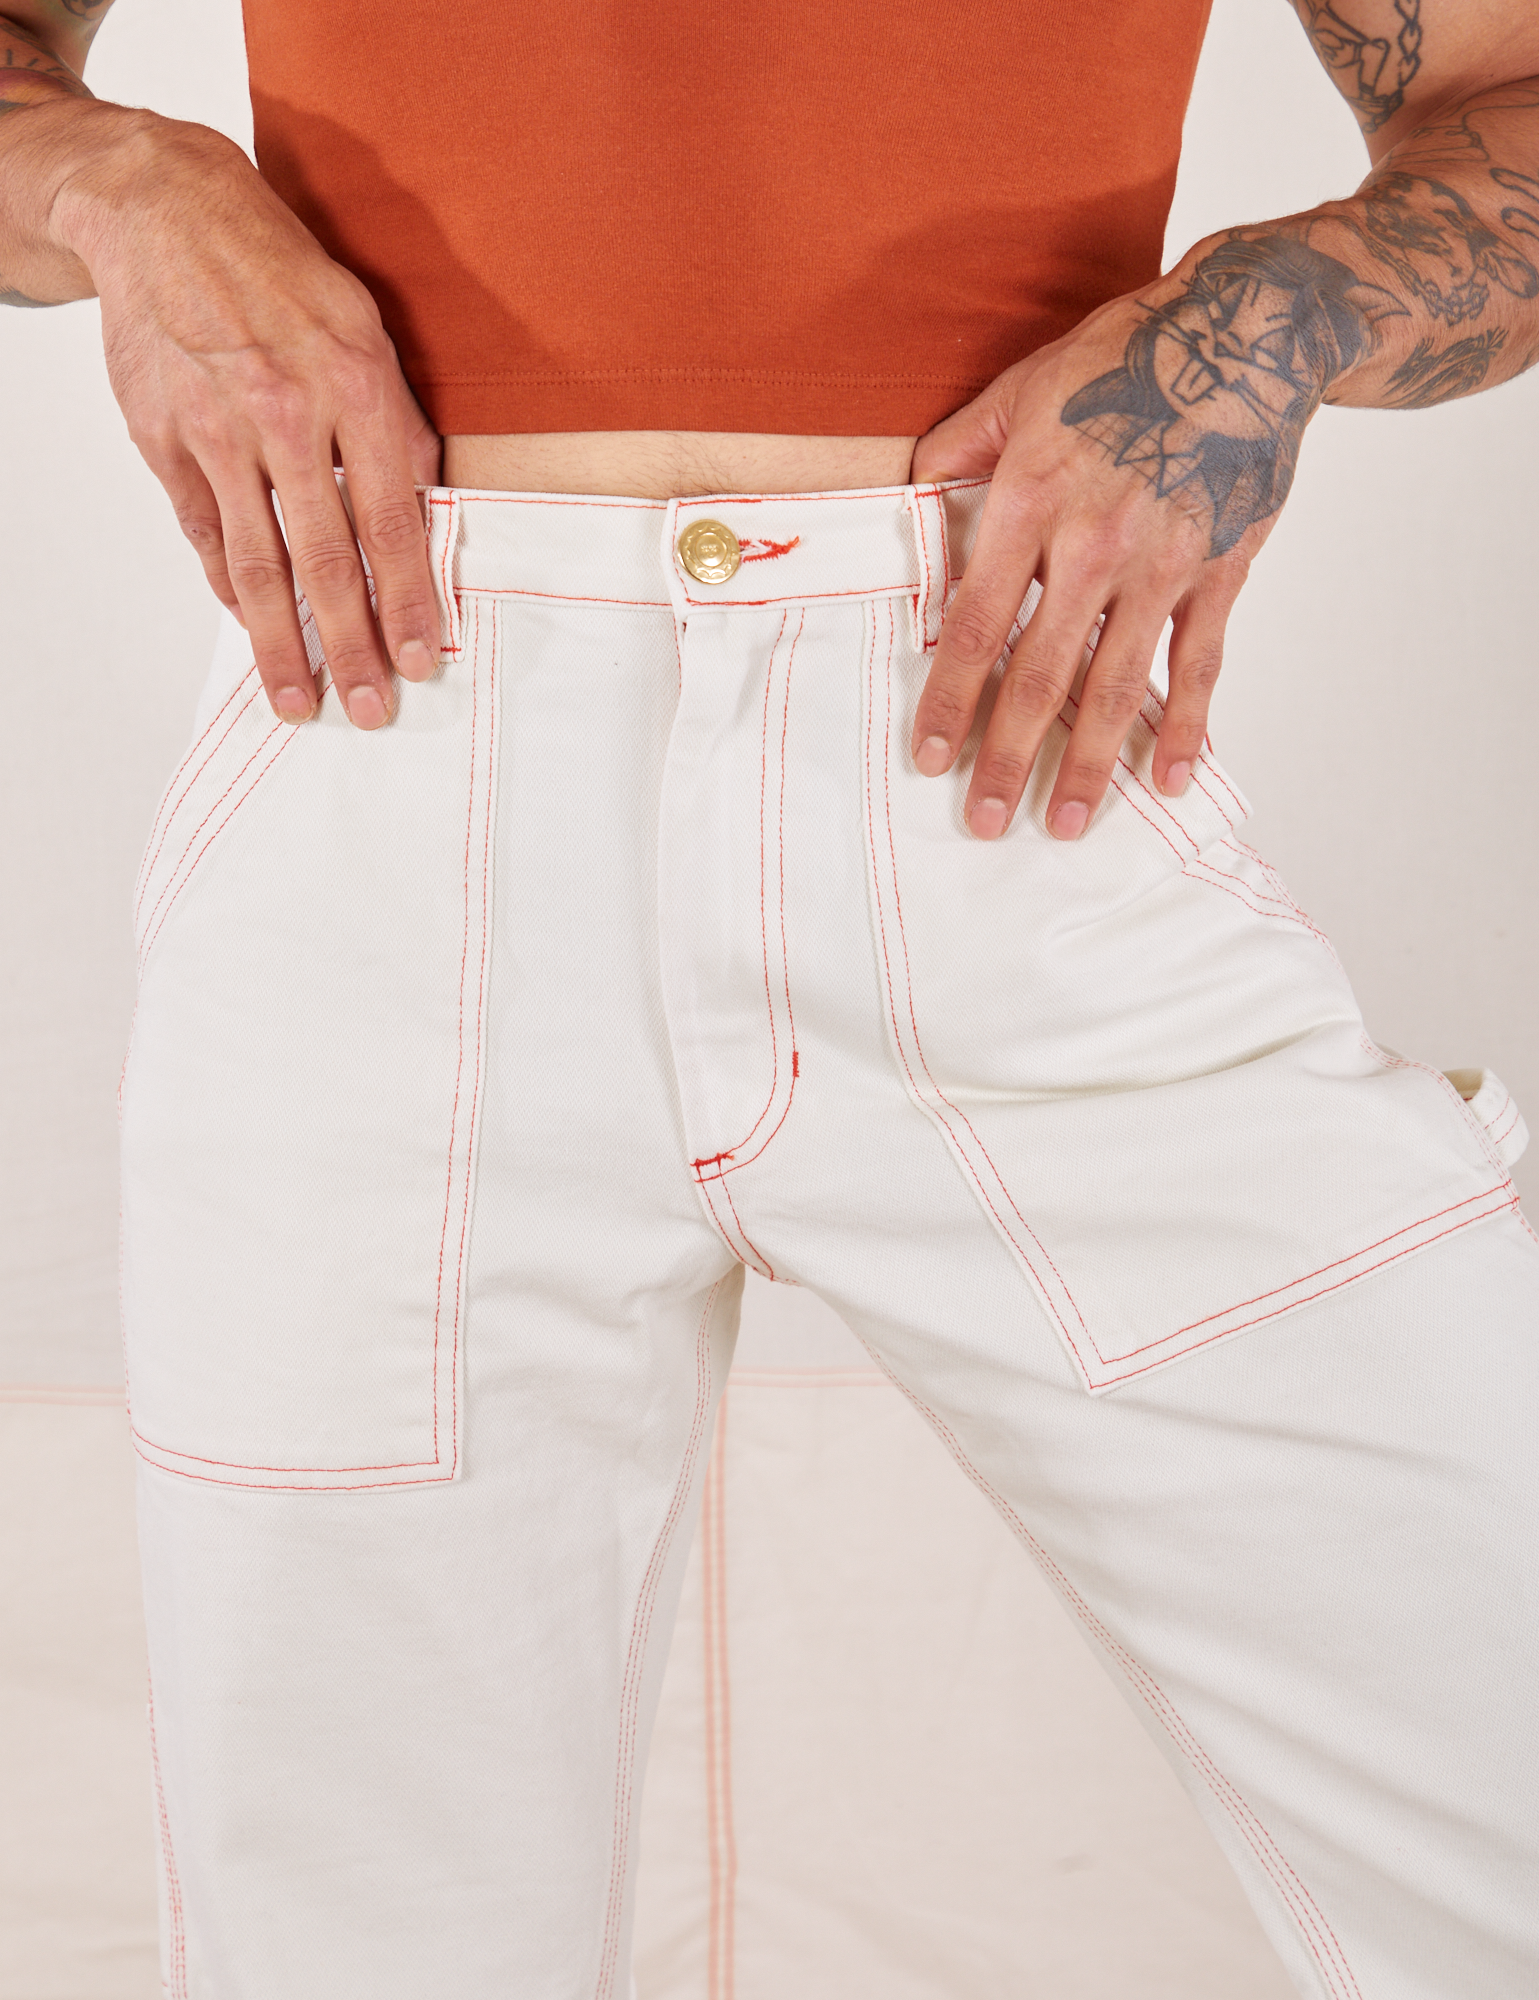 Carpenter Jeans in Vintage Off-White front close up on Jesse